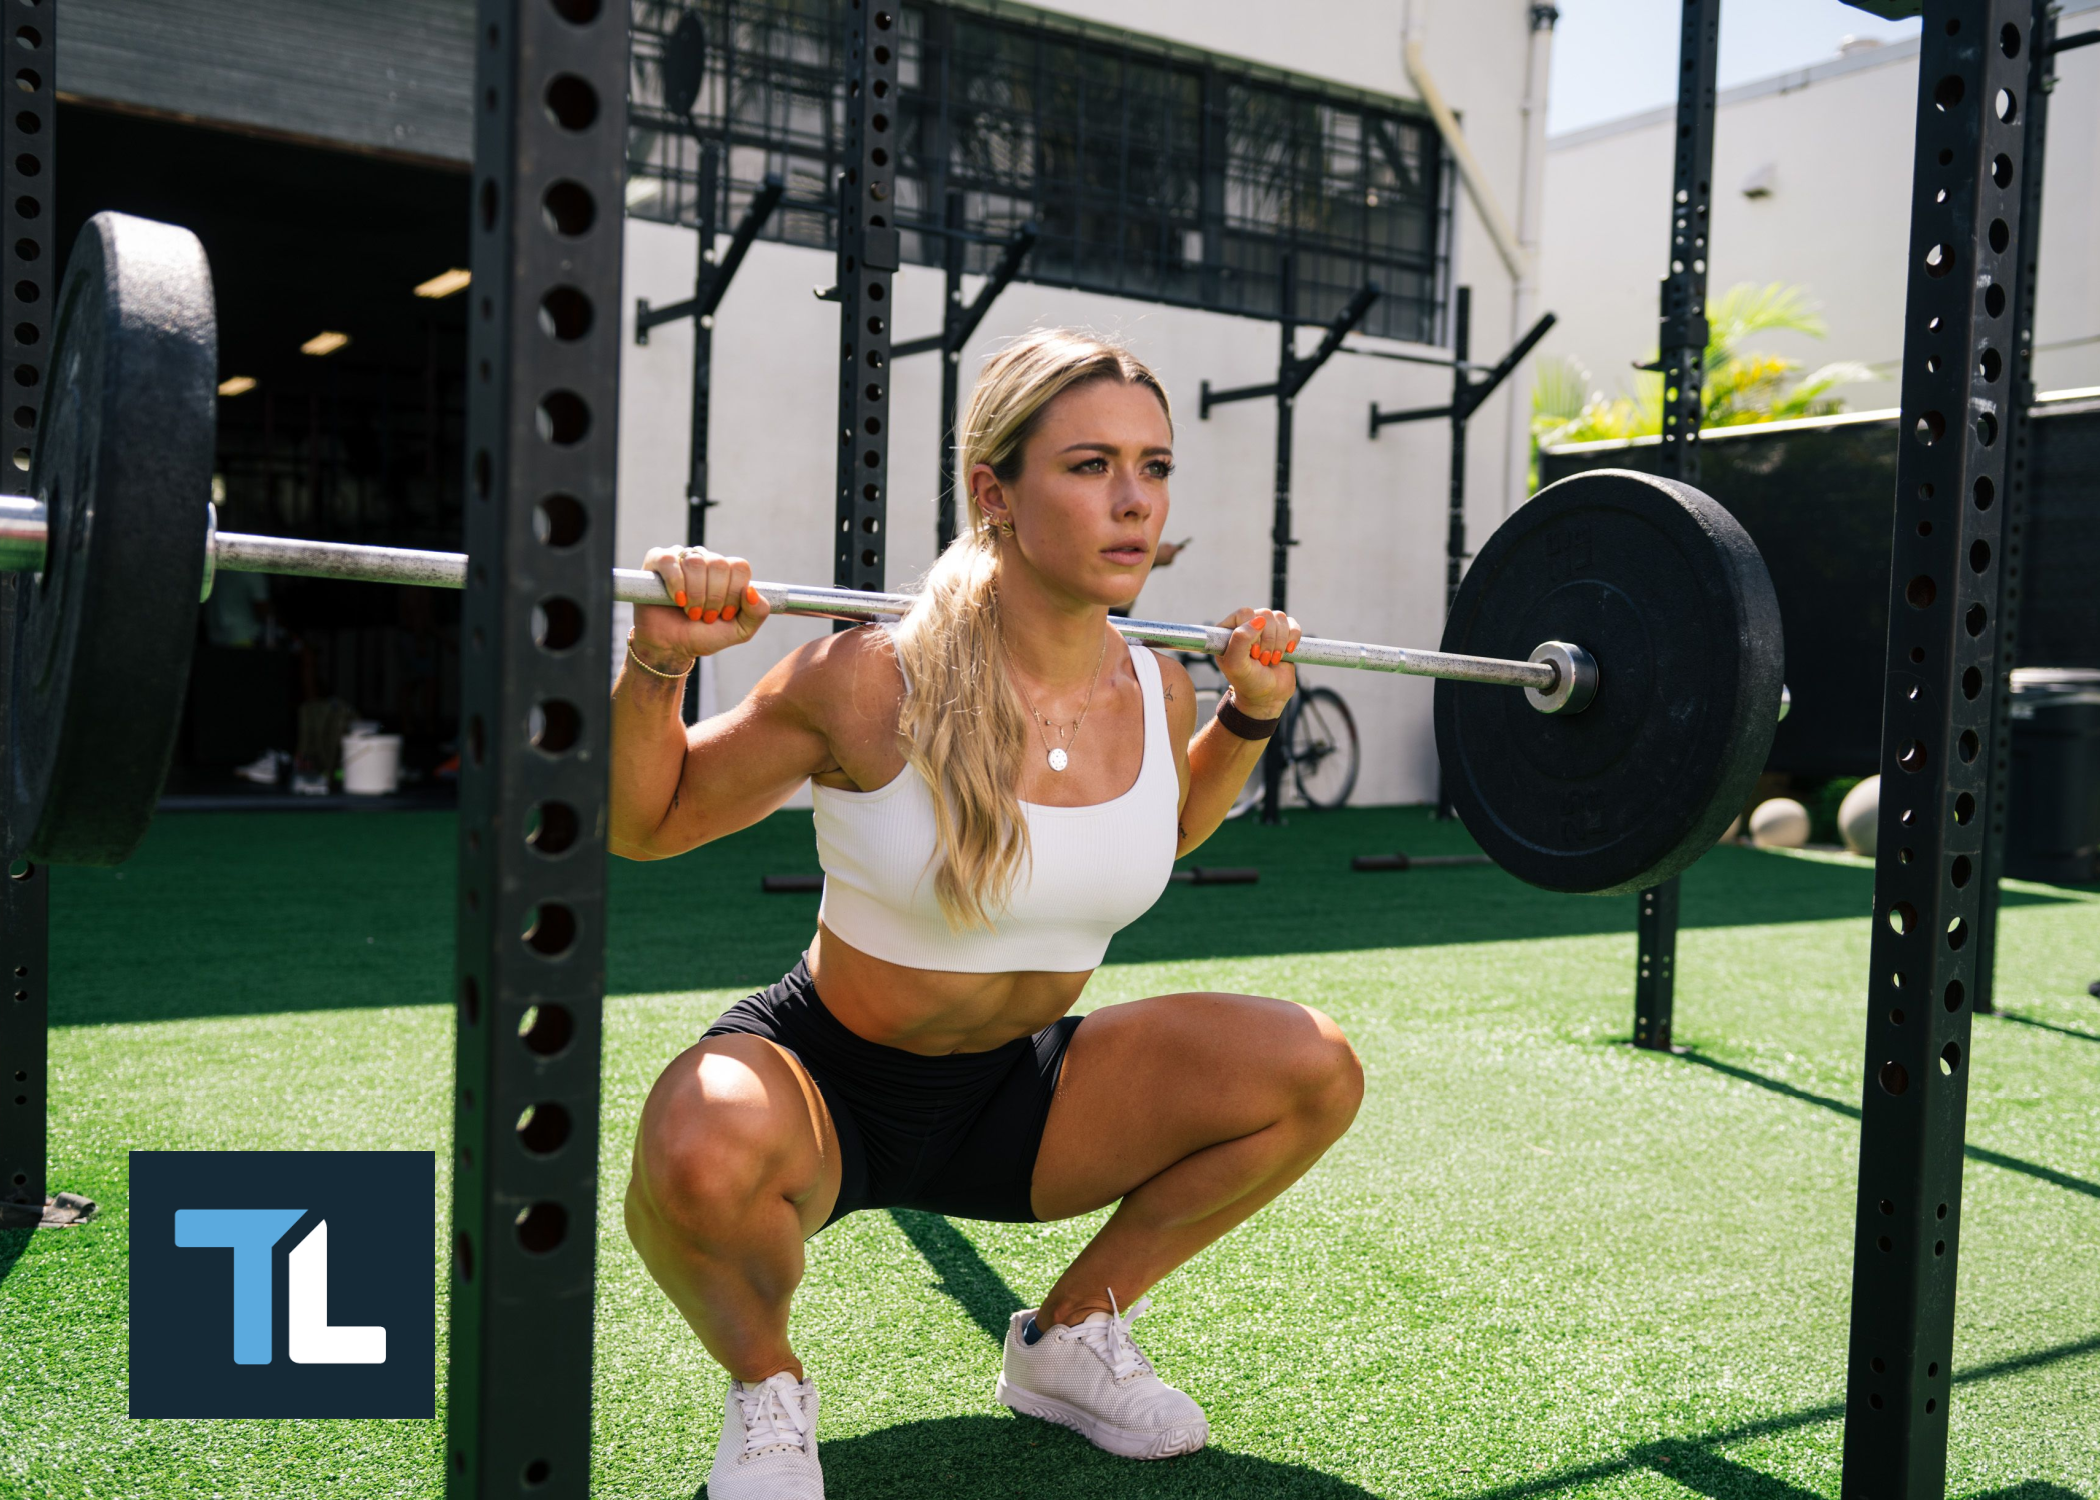 Does lifting weights make women bulky? The myth that won't die - CNET